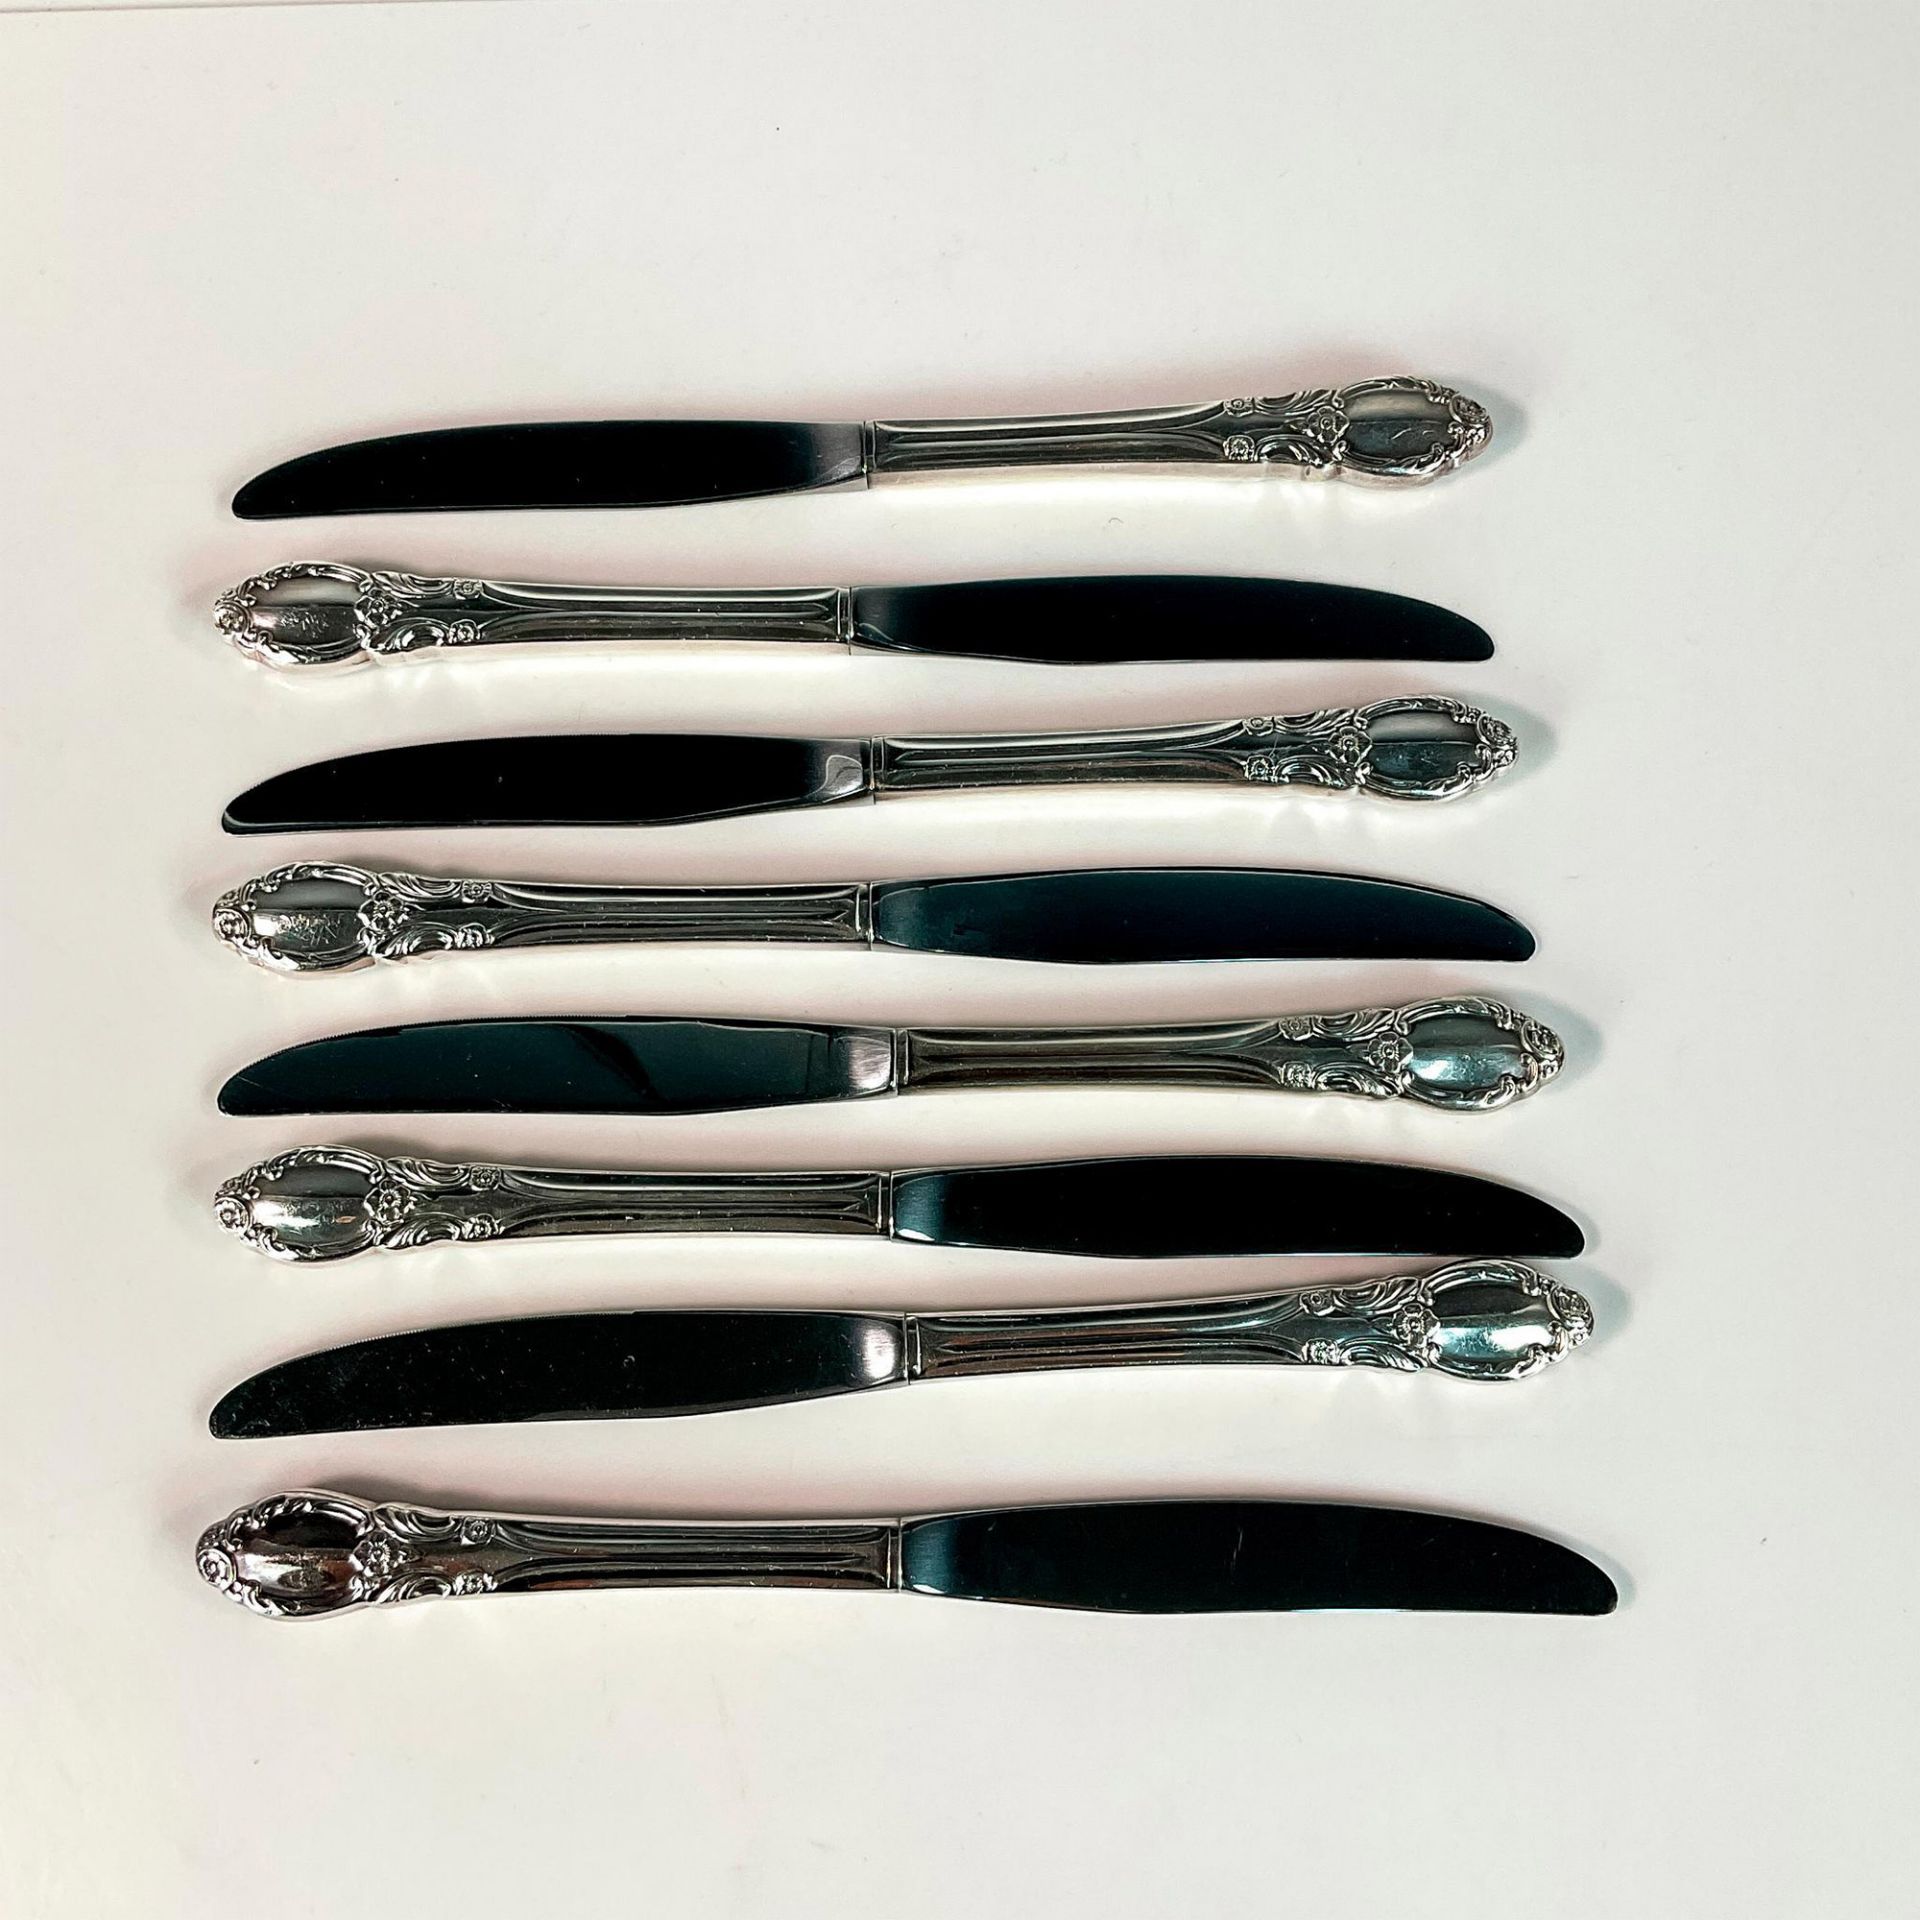 Set of 8 Silver Plated Flatware Knives - Image 2 of 2